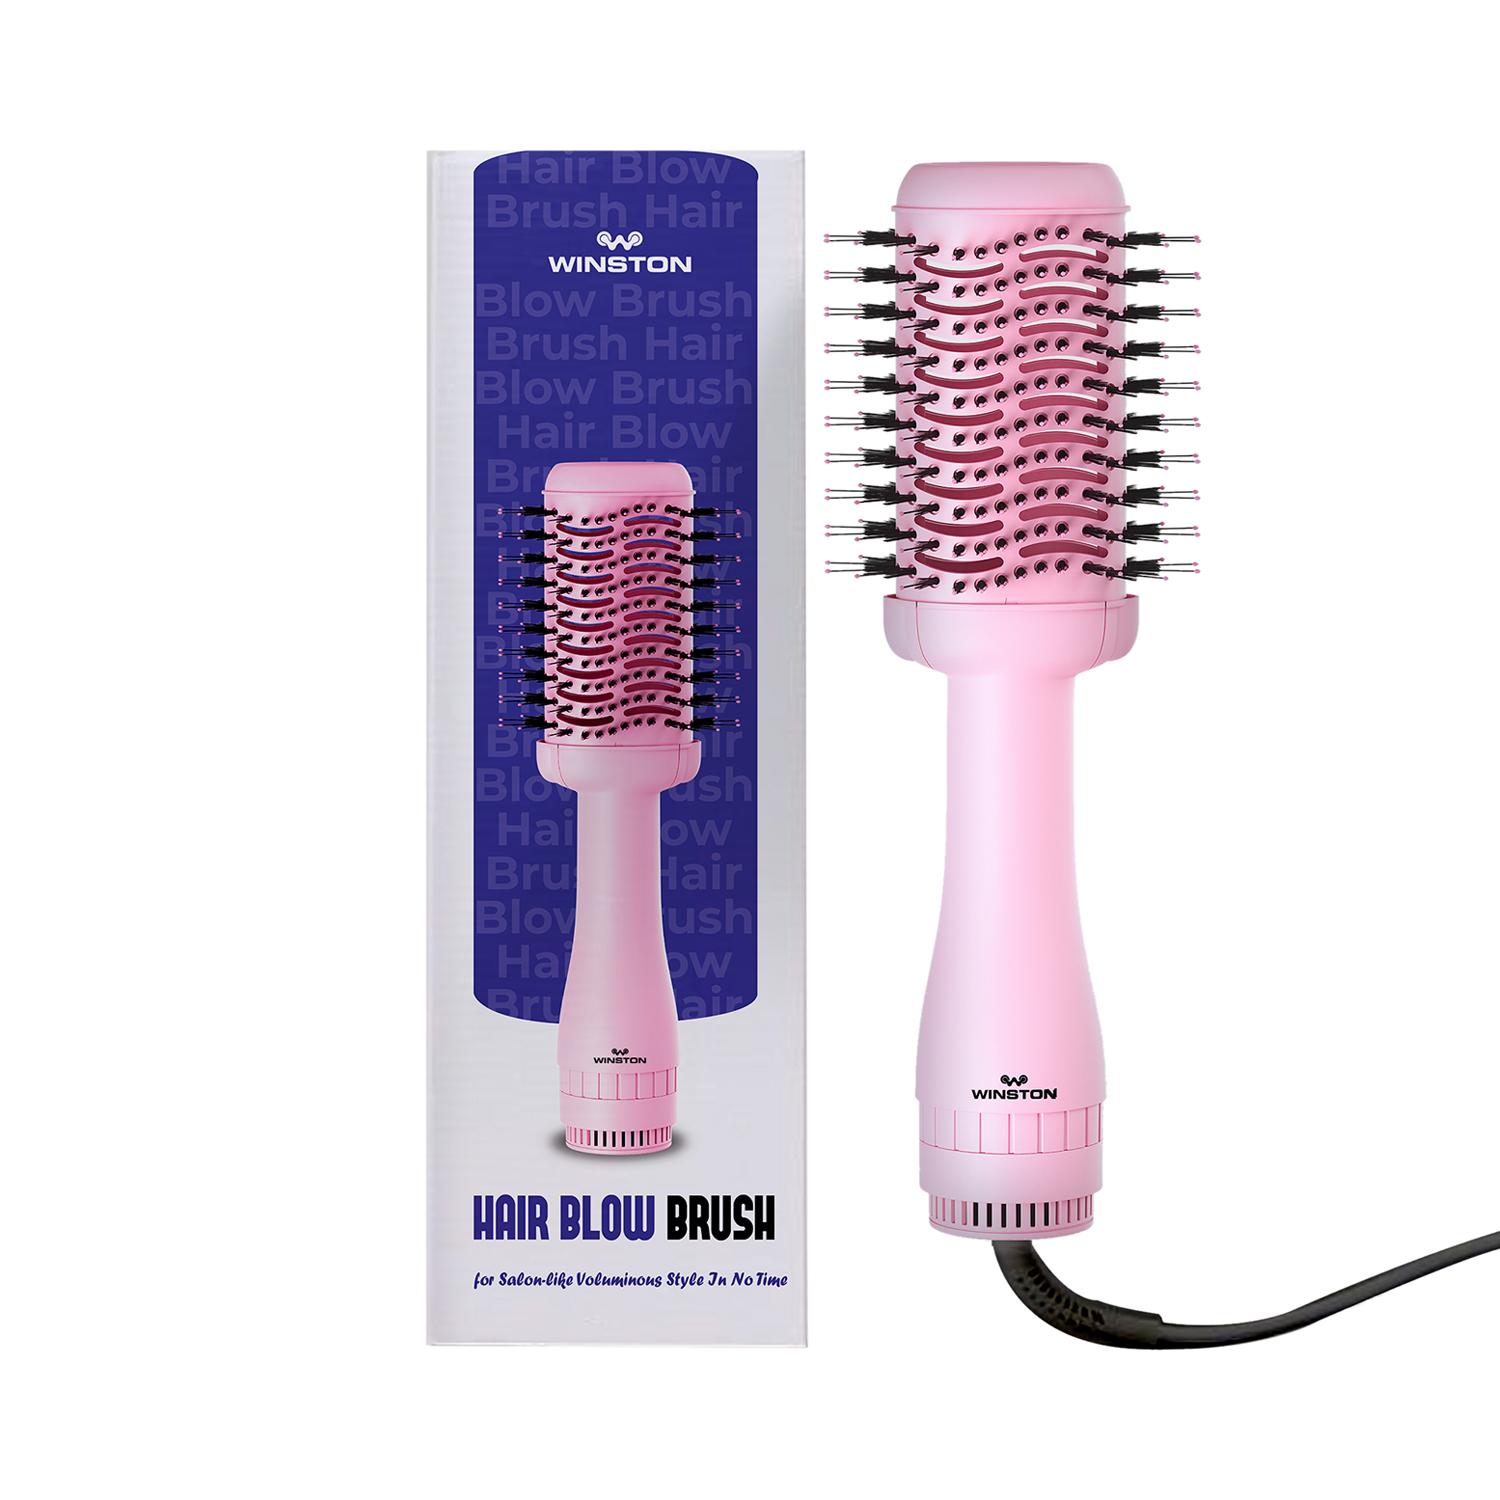 WINSTON | WINSTON Blow Drying Brush With Adjustable Temperature Setting 1200W - Pink (1Pc)